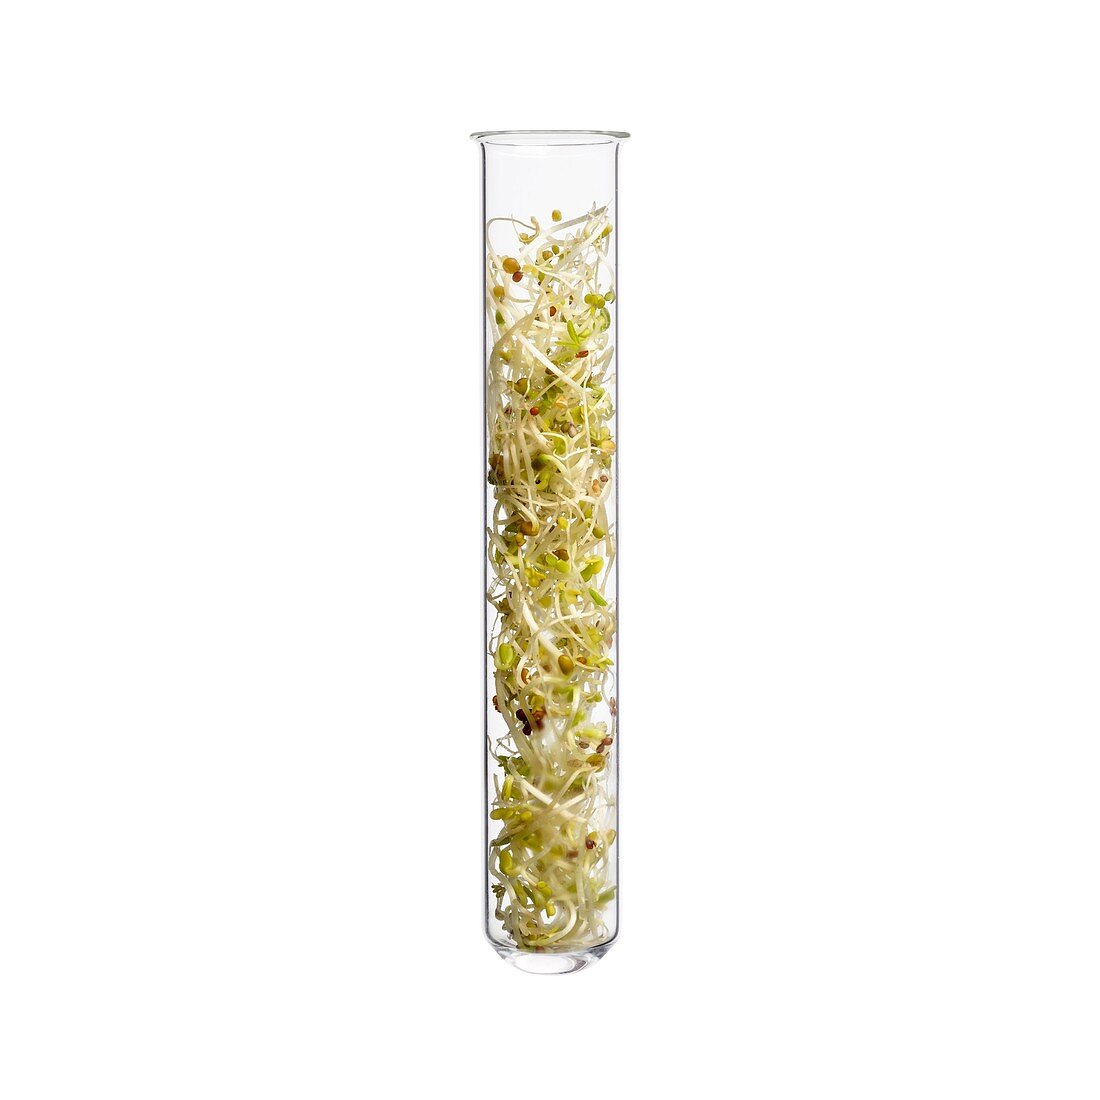 Alfalfa sprouts in test tube